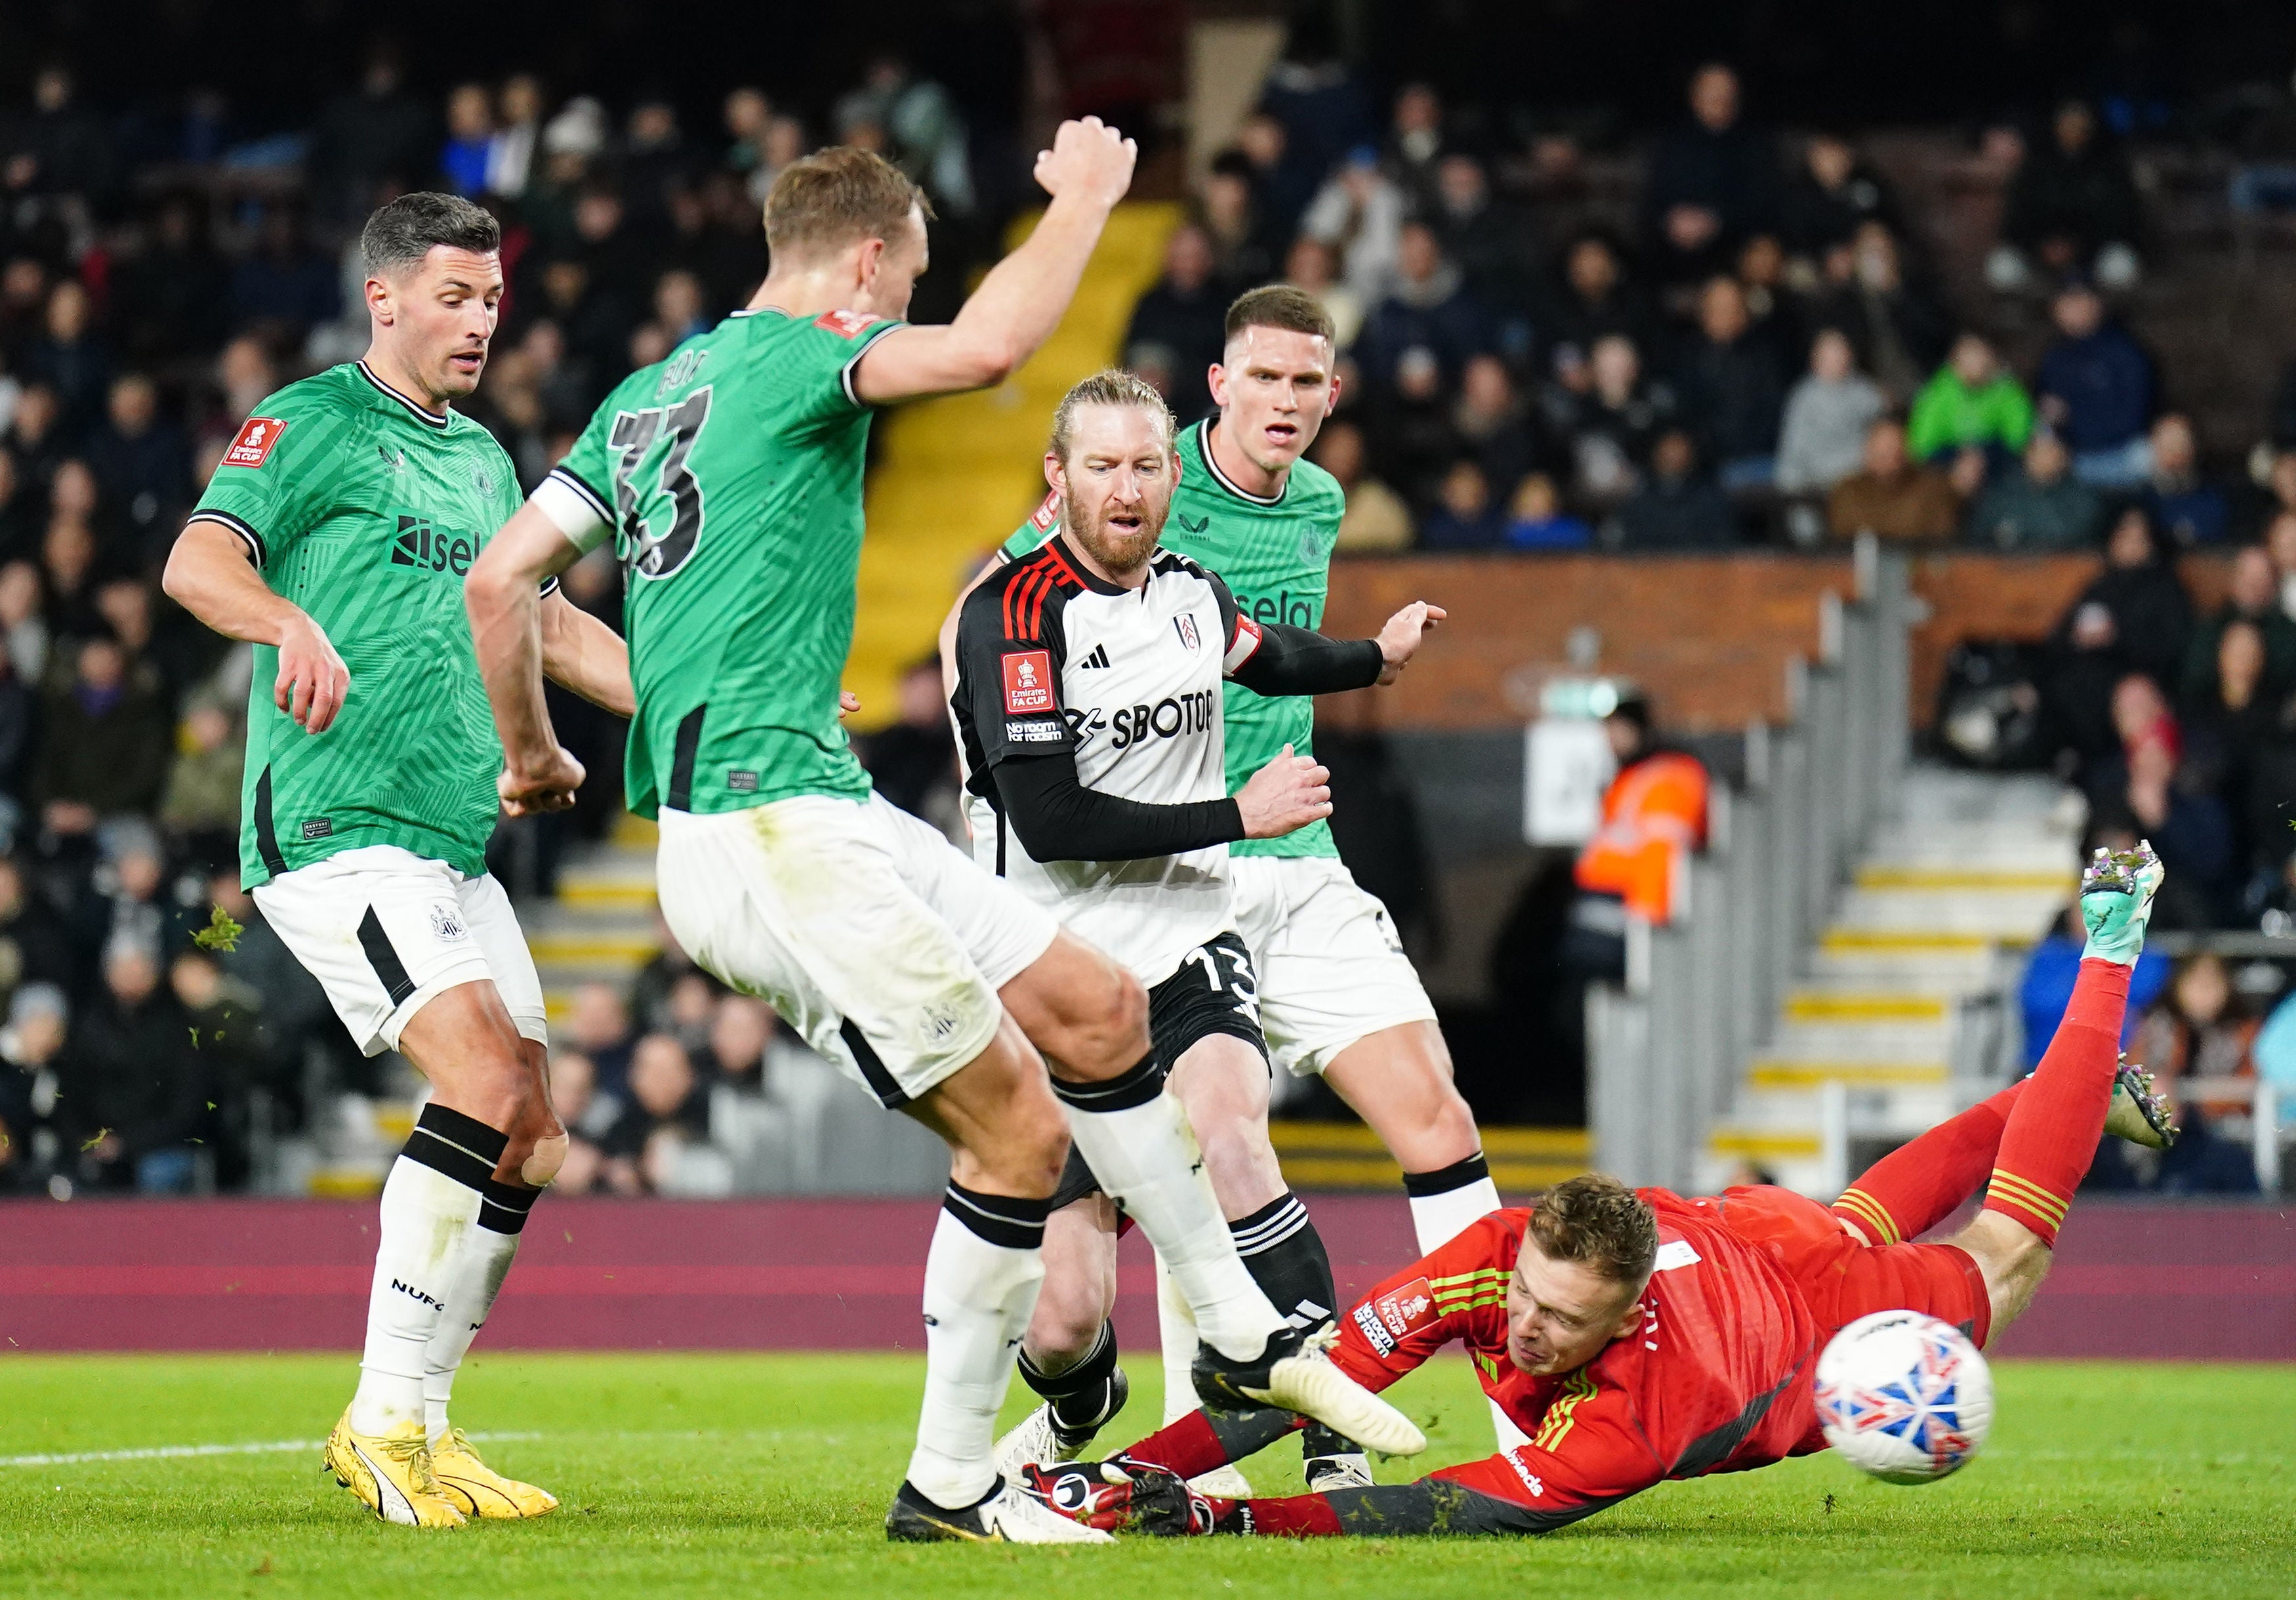 Dan Burn’s goal sent Newcastle into the next round after Sean Longstaff had opened the scoring